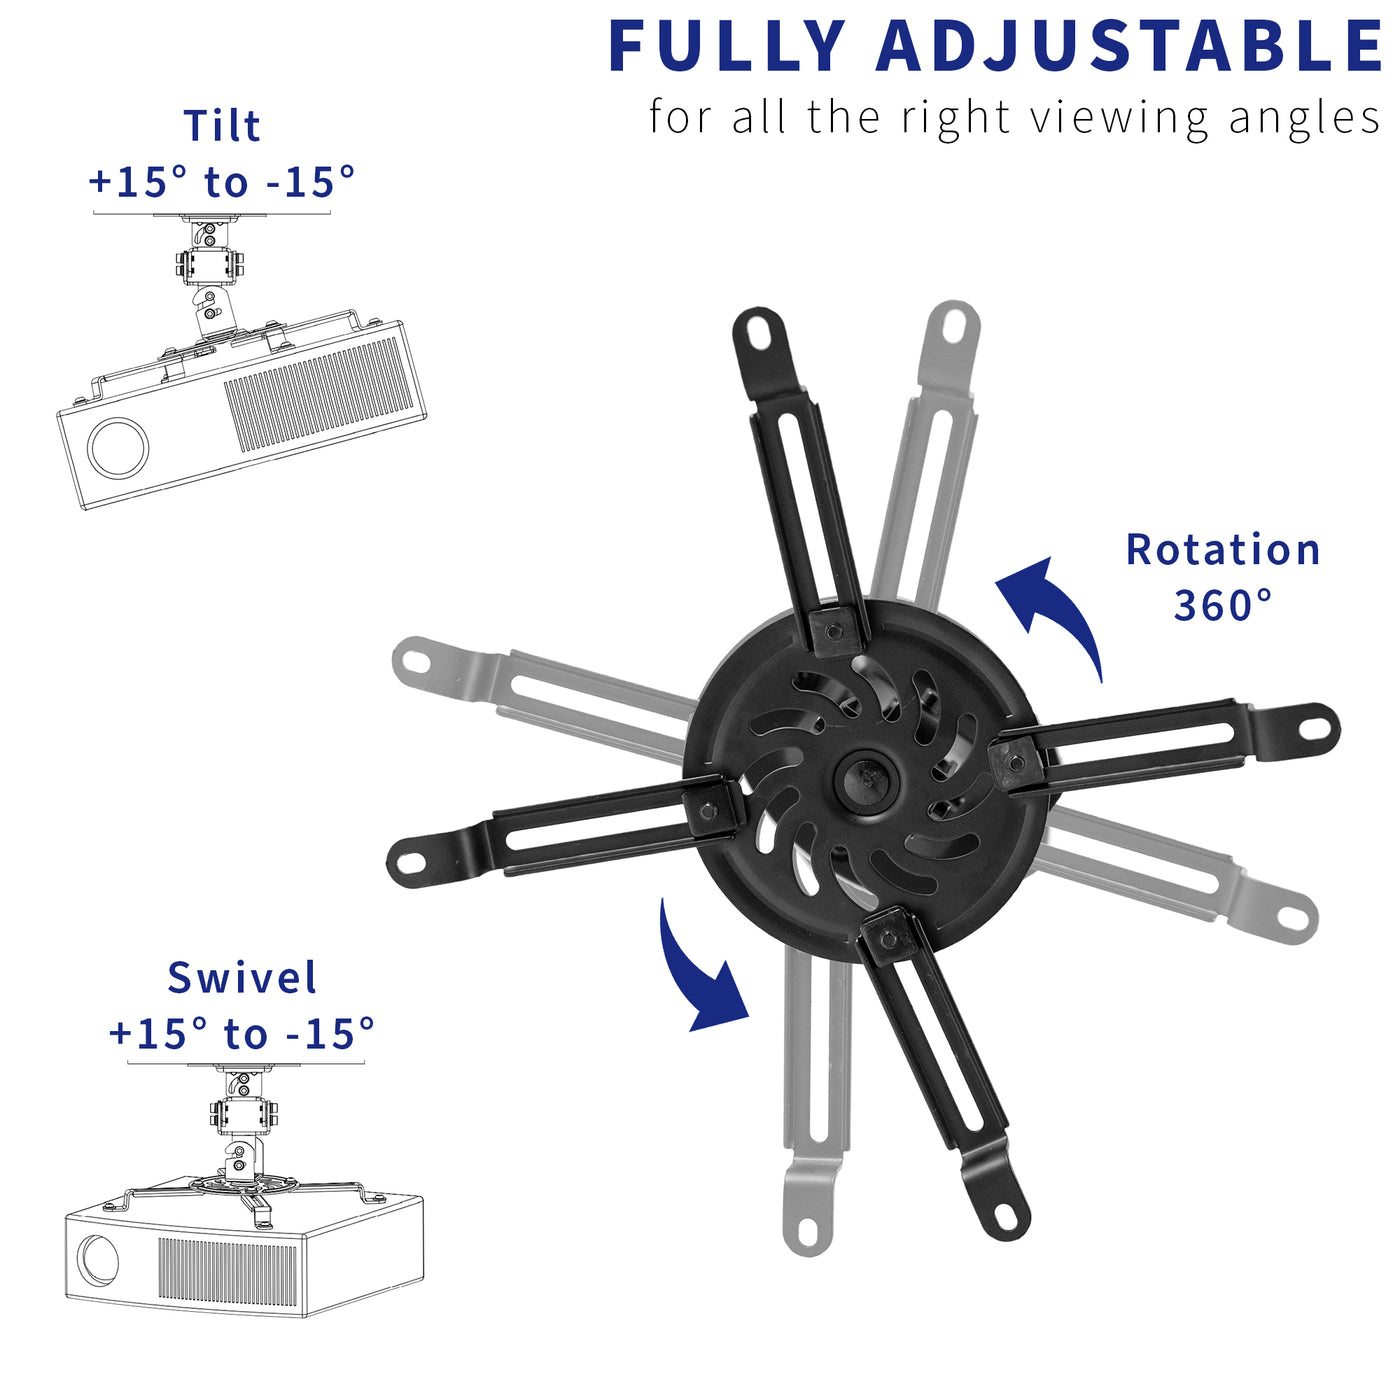 Fully adjustable ceiling mount for projectors.